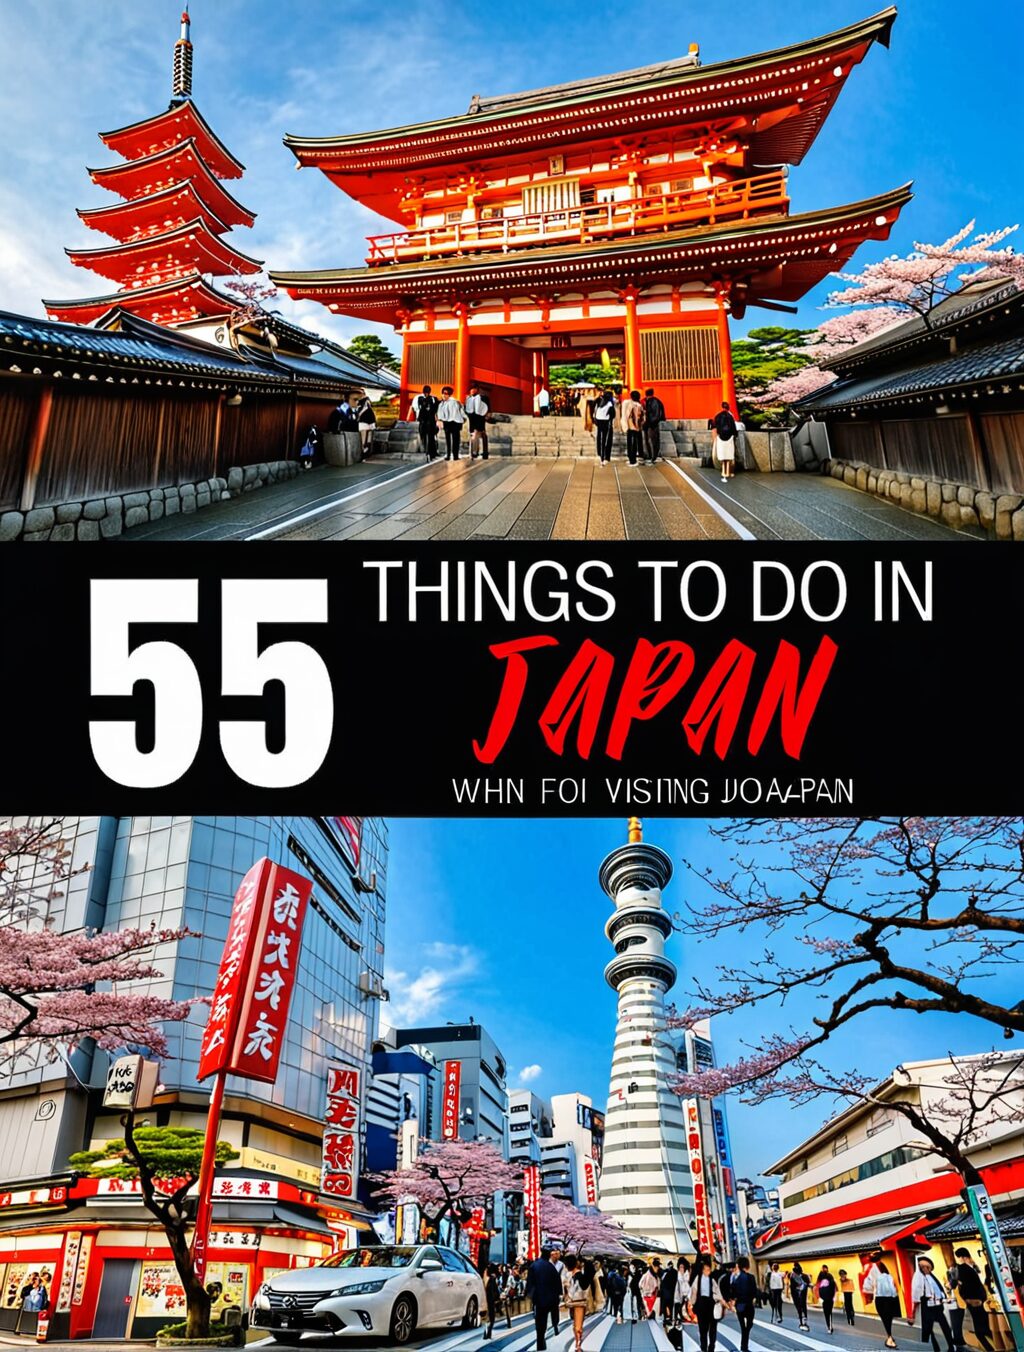 things to do when visiting japan